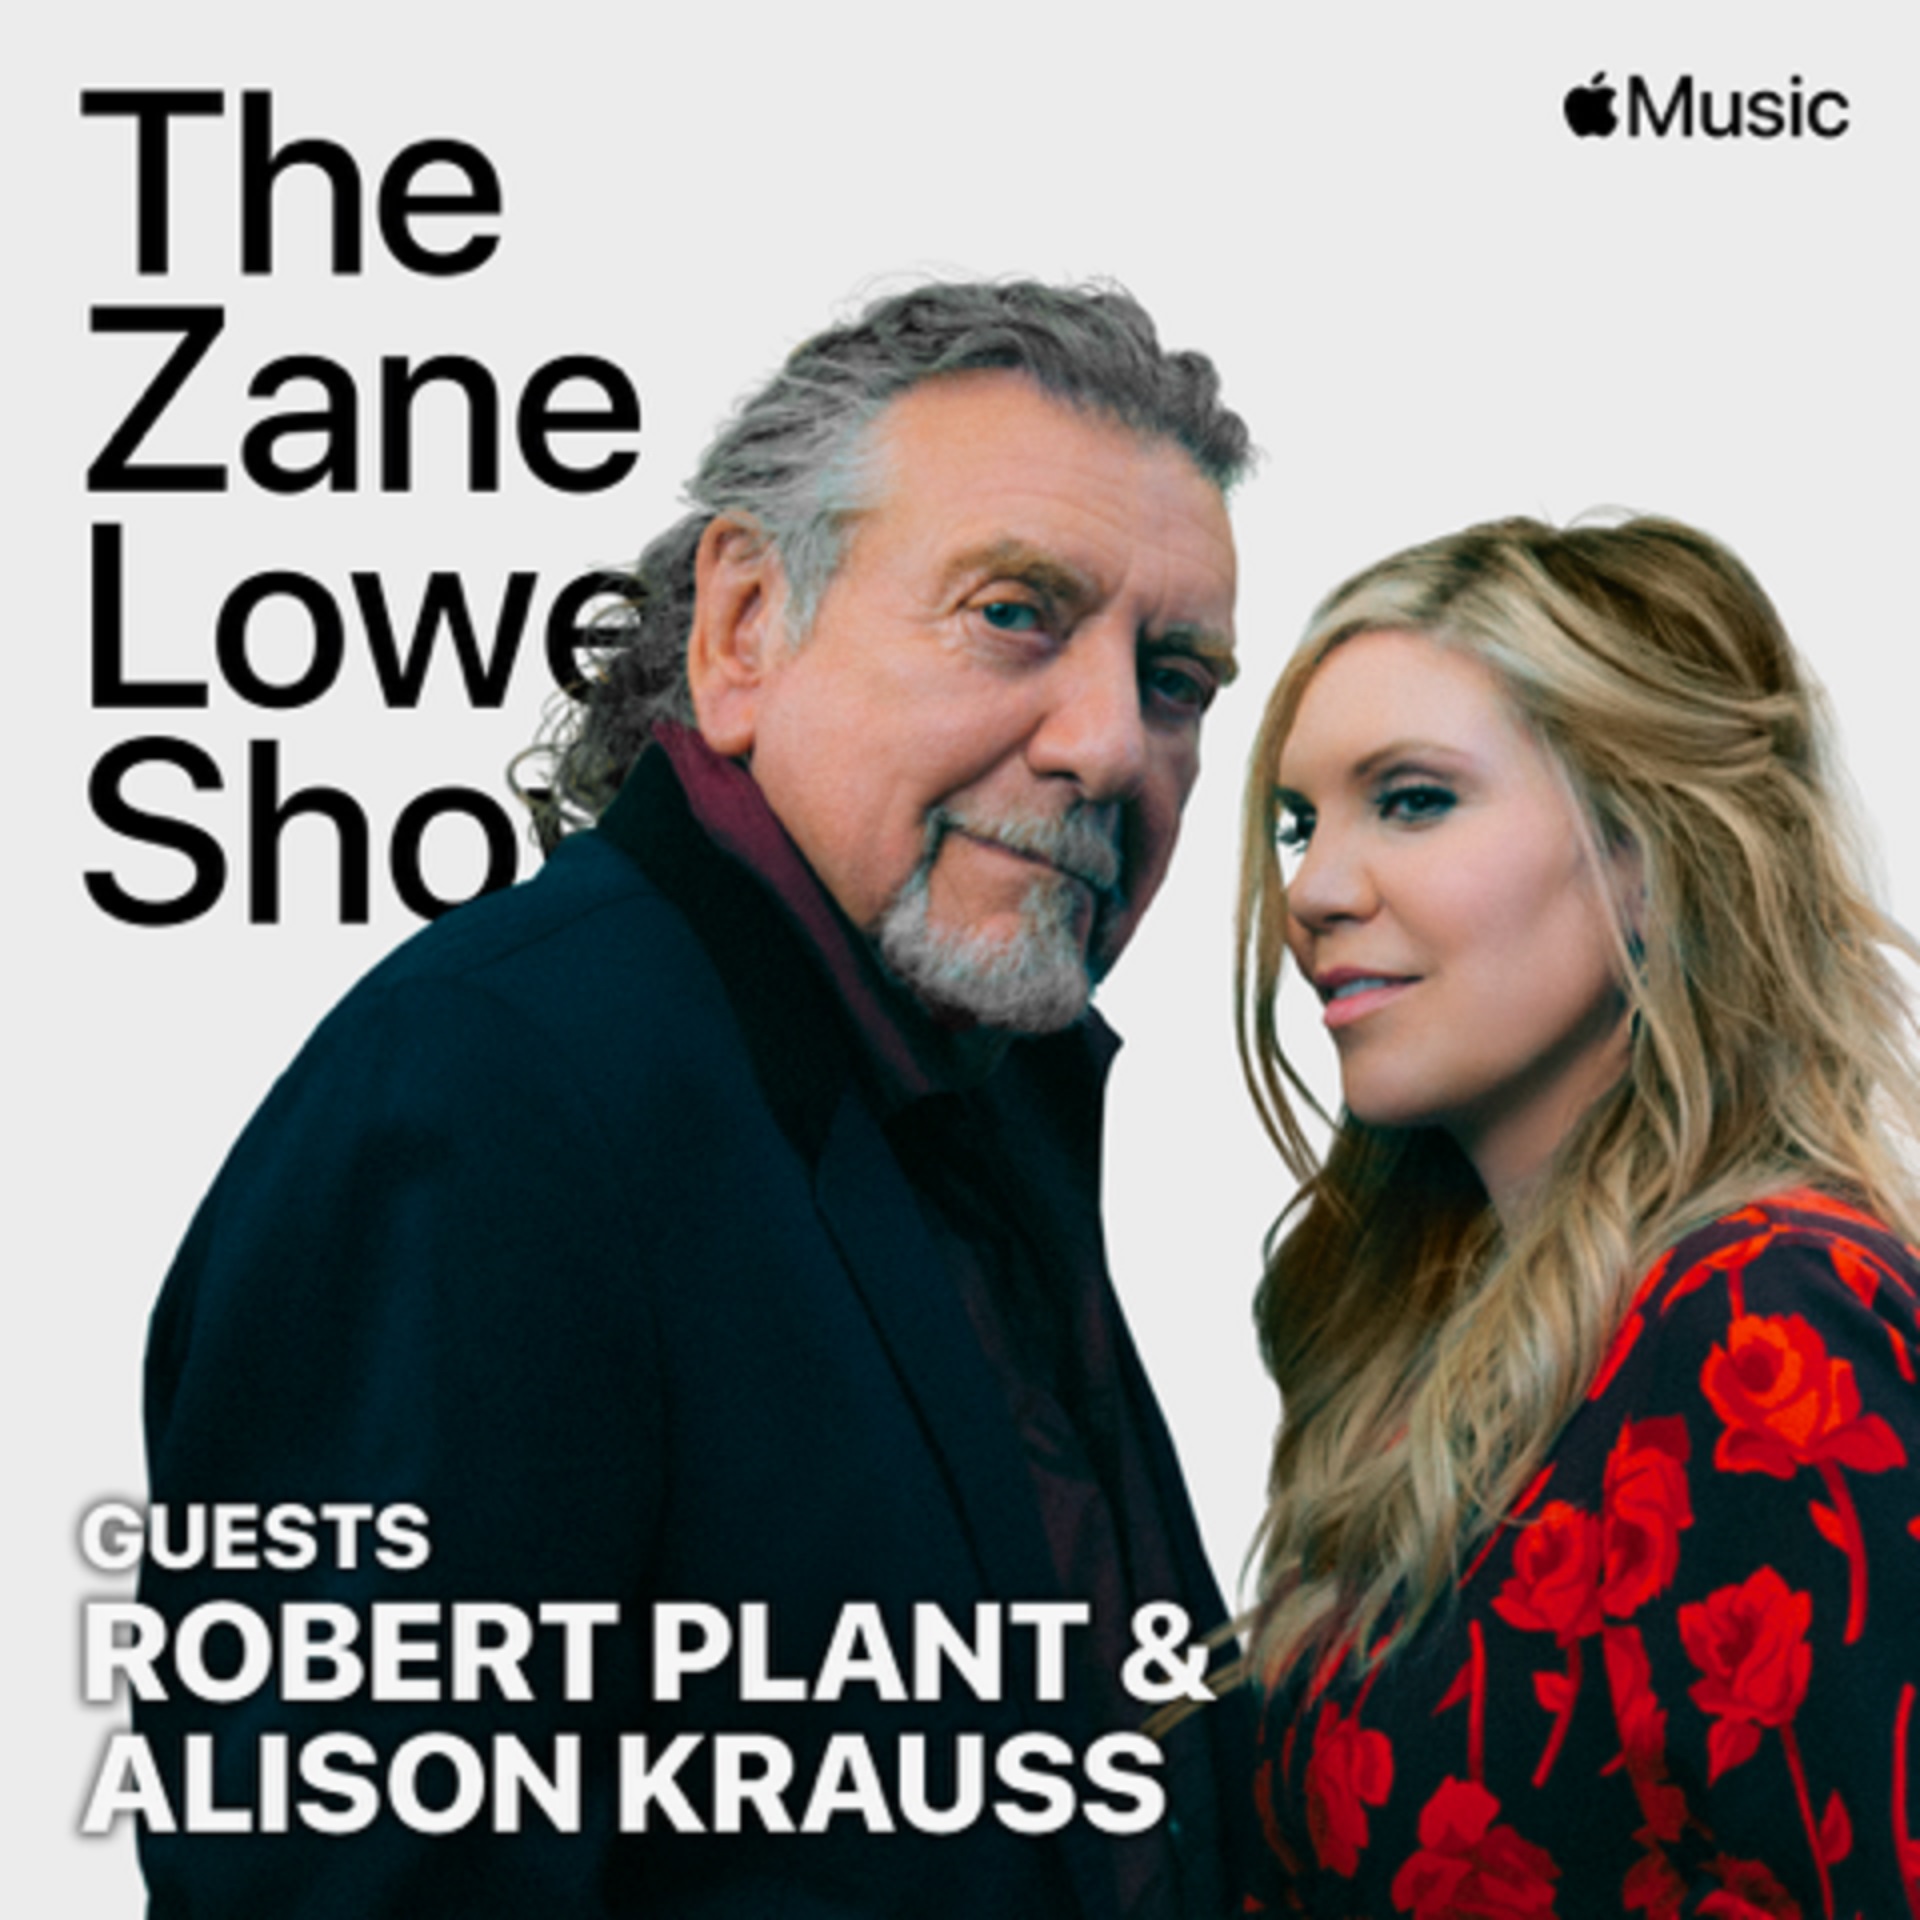 Robert Plant and Alison Krauss Tell Apple Music About Forthcoming Album 'Raise The Roof'